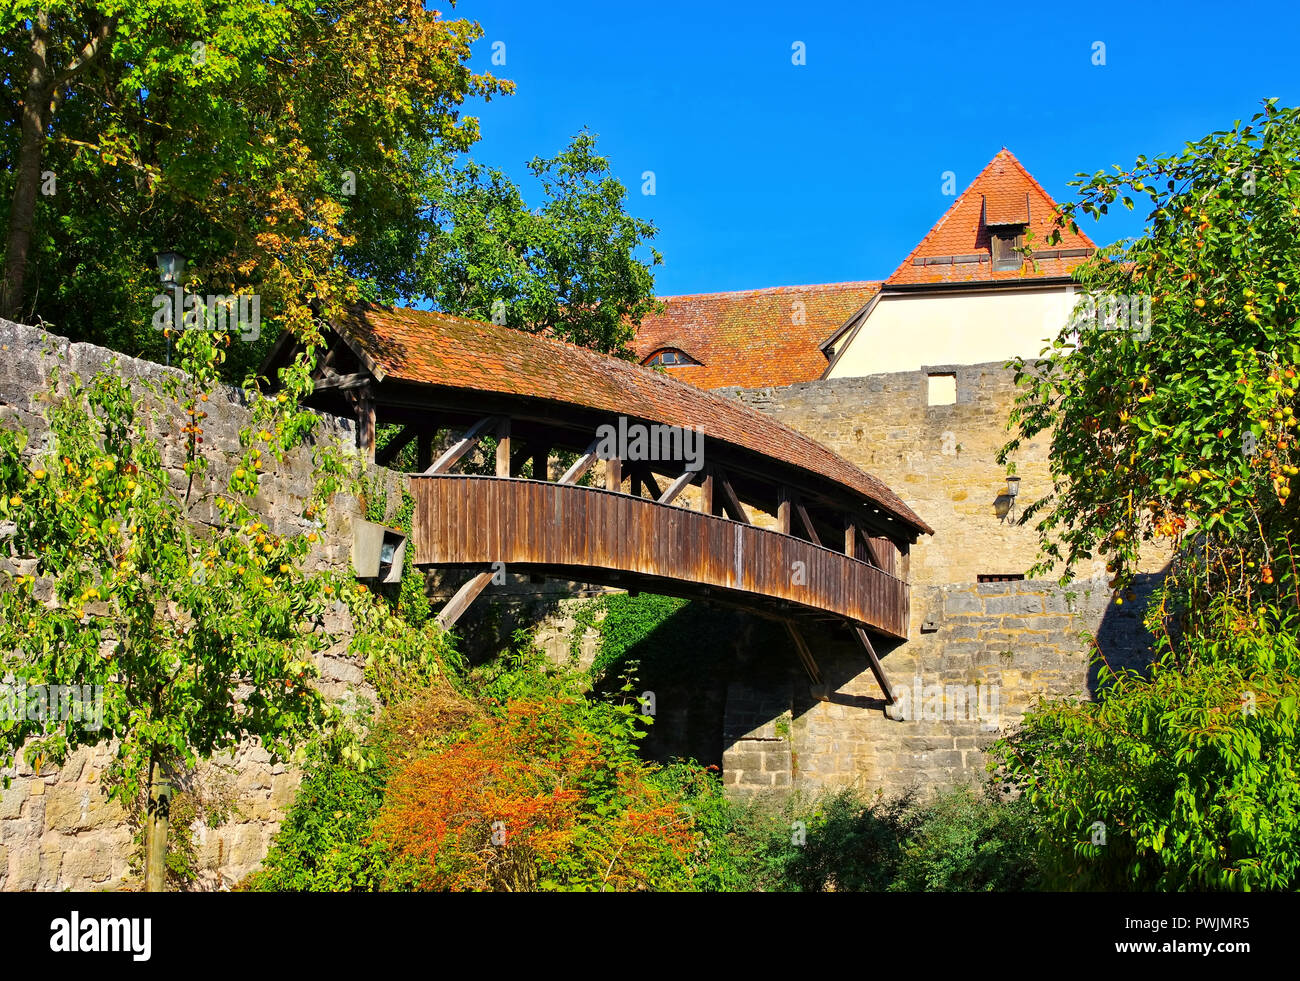 Rothenburg in Germany, the old wooden bridge on city wall Stock Photo